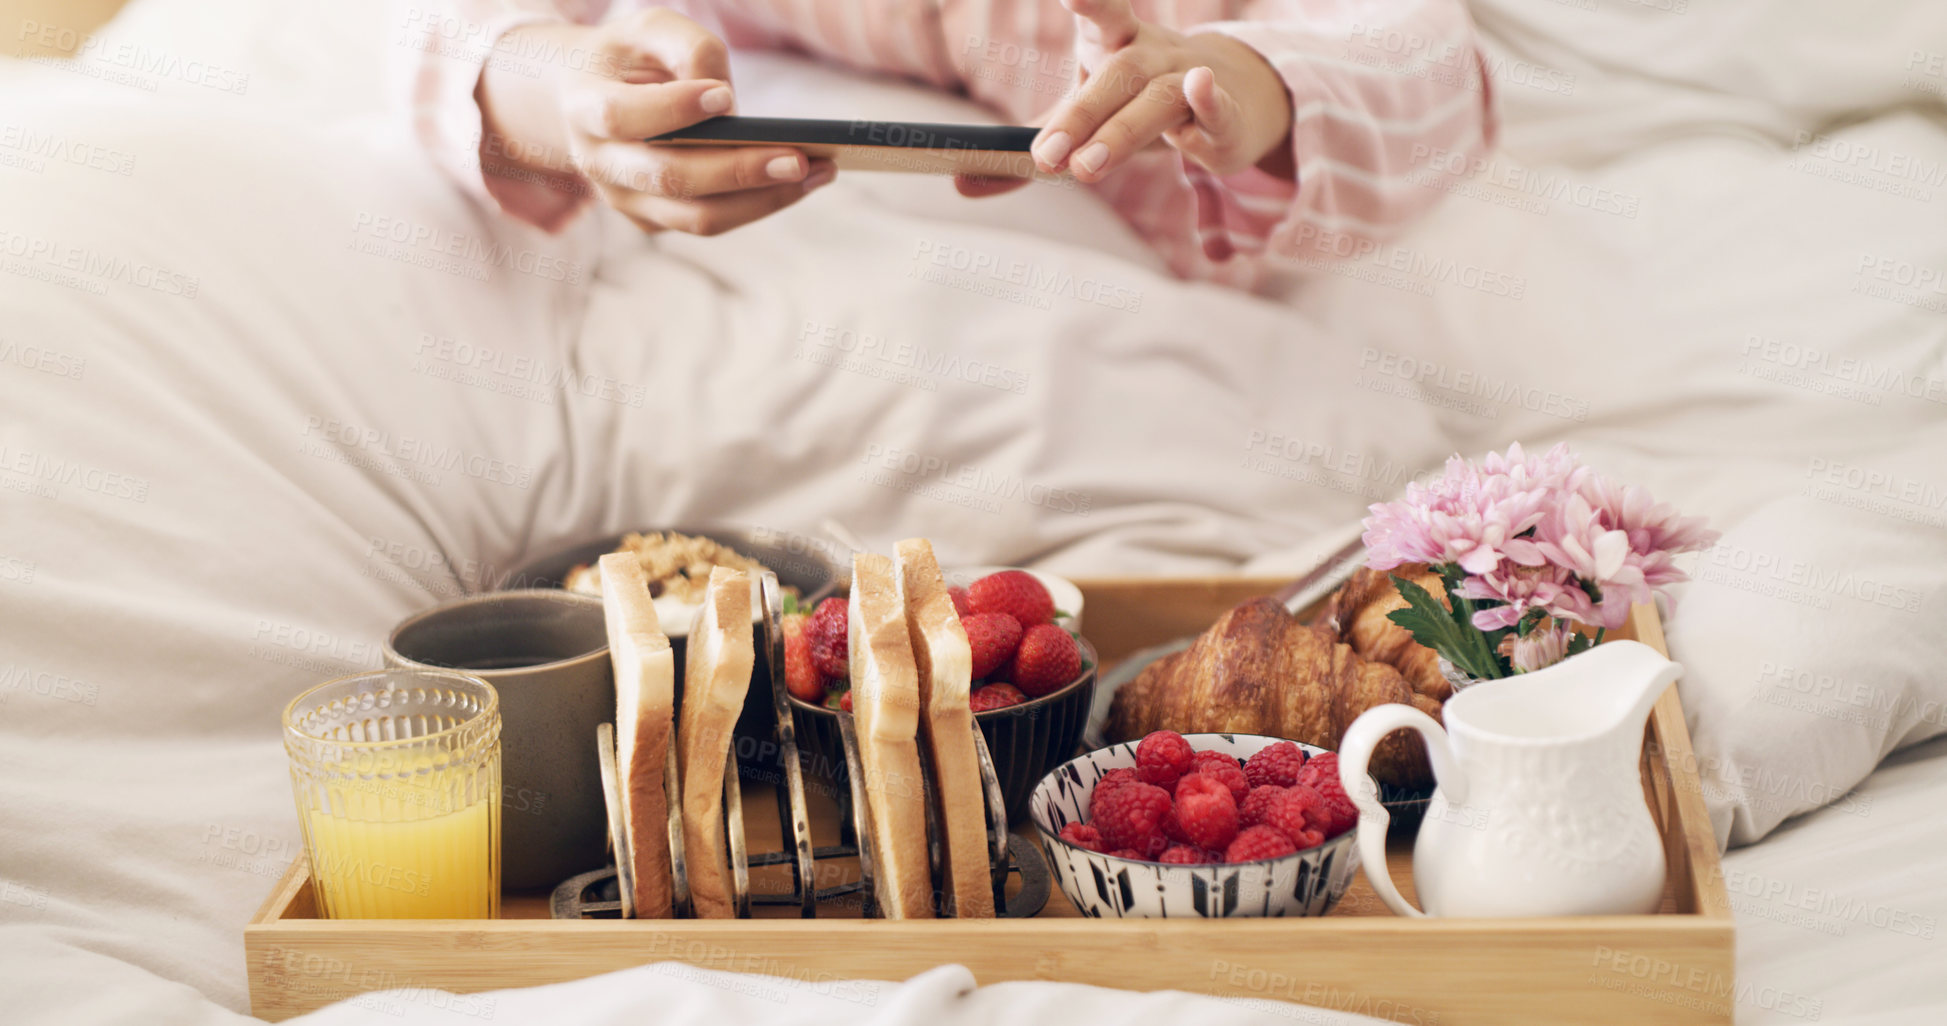 Buy stock photo Cropped shot of a woman taking a picture of her breakfast in bed at home